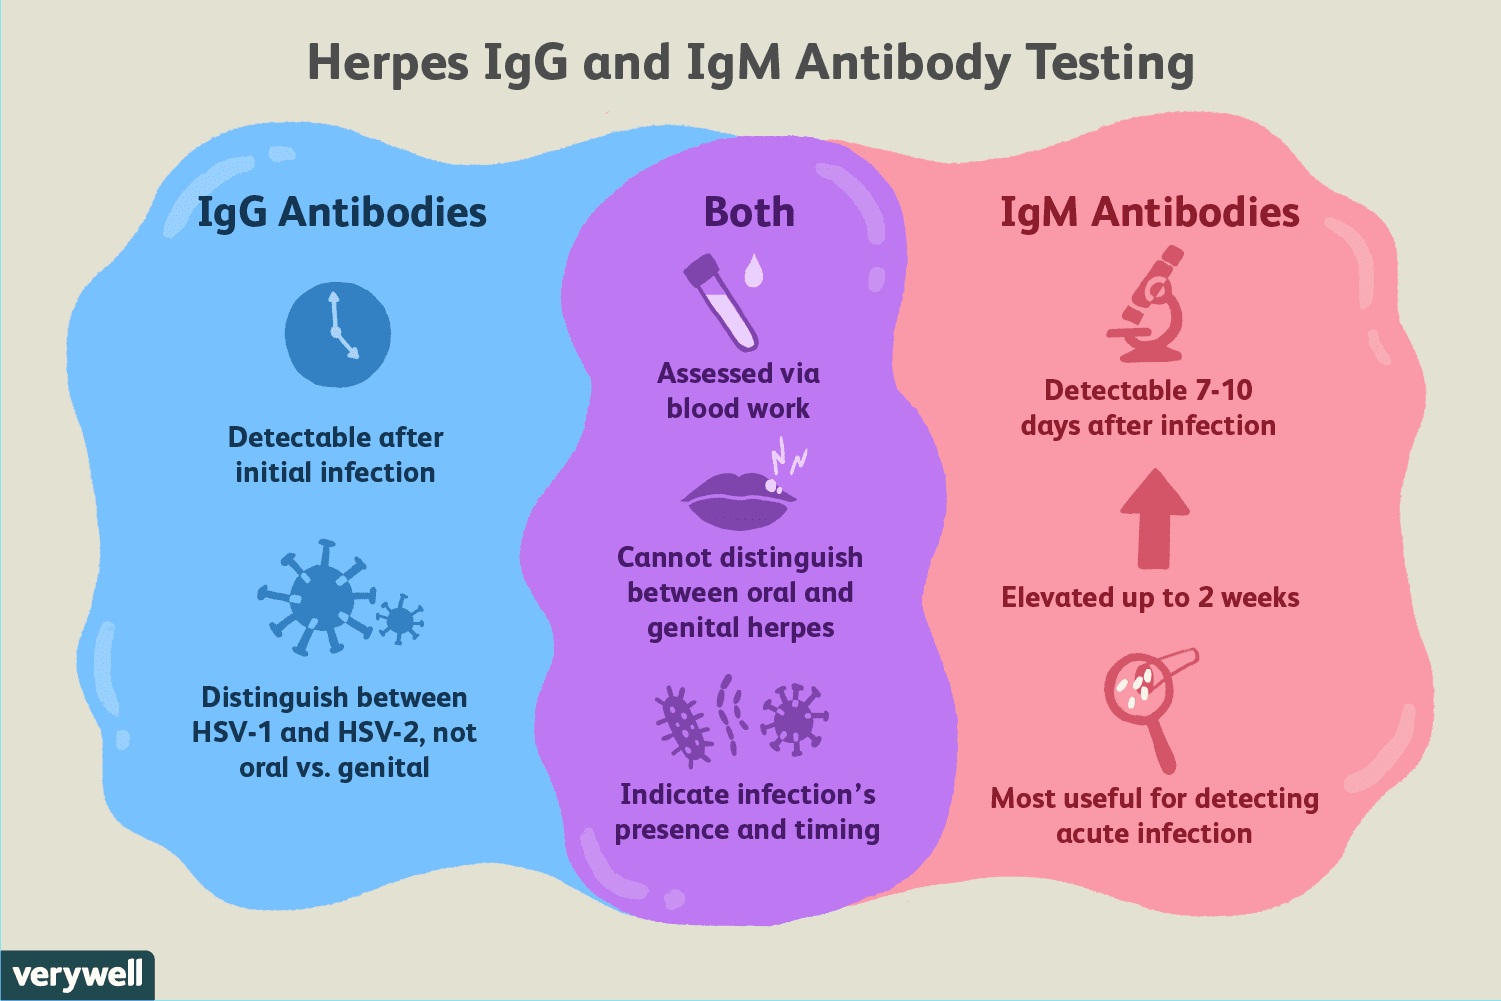 What Does a Positive Herpes IgG Blood Test Mean?